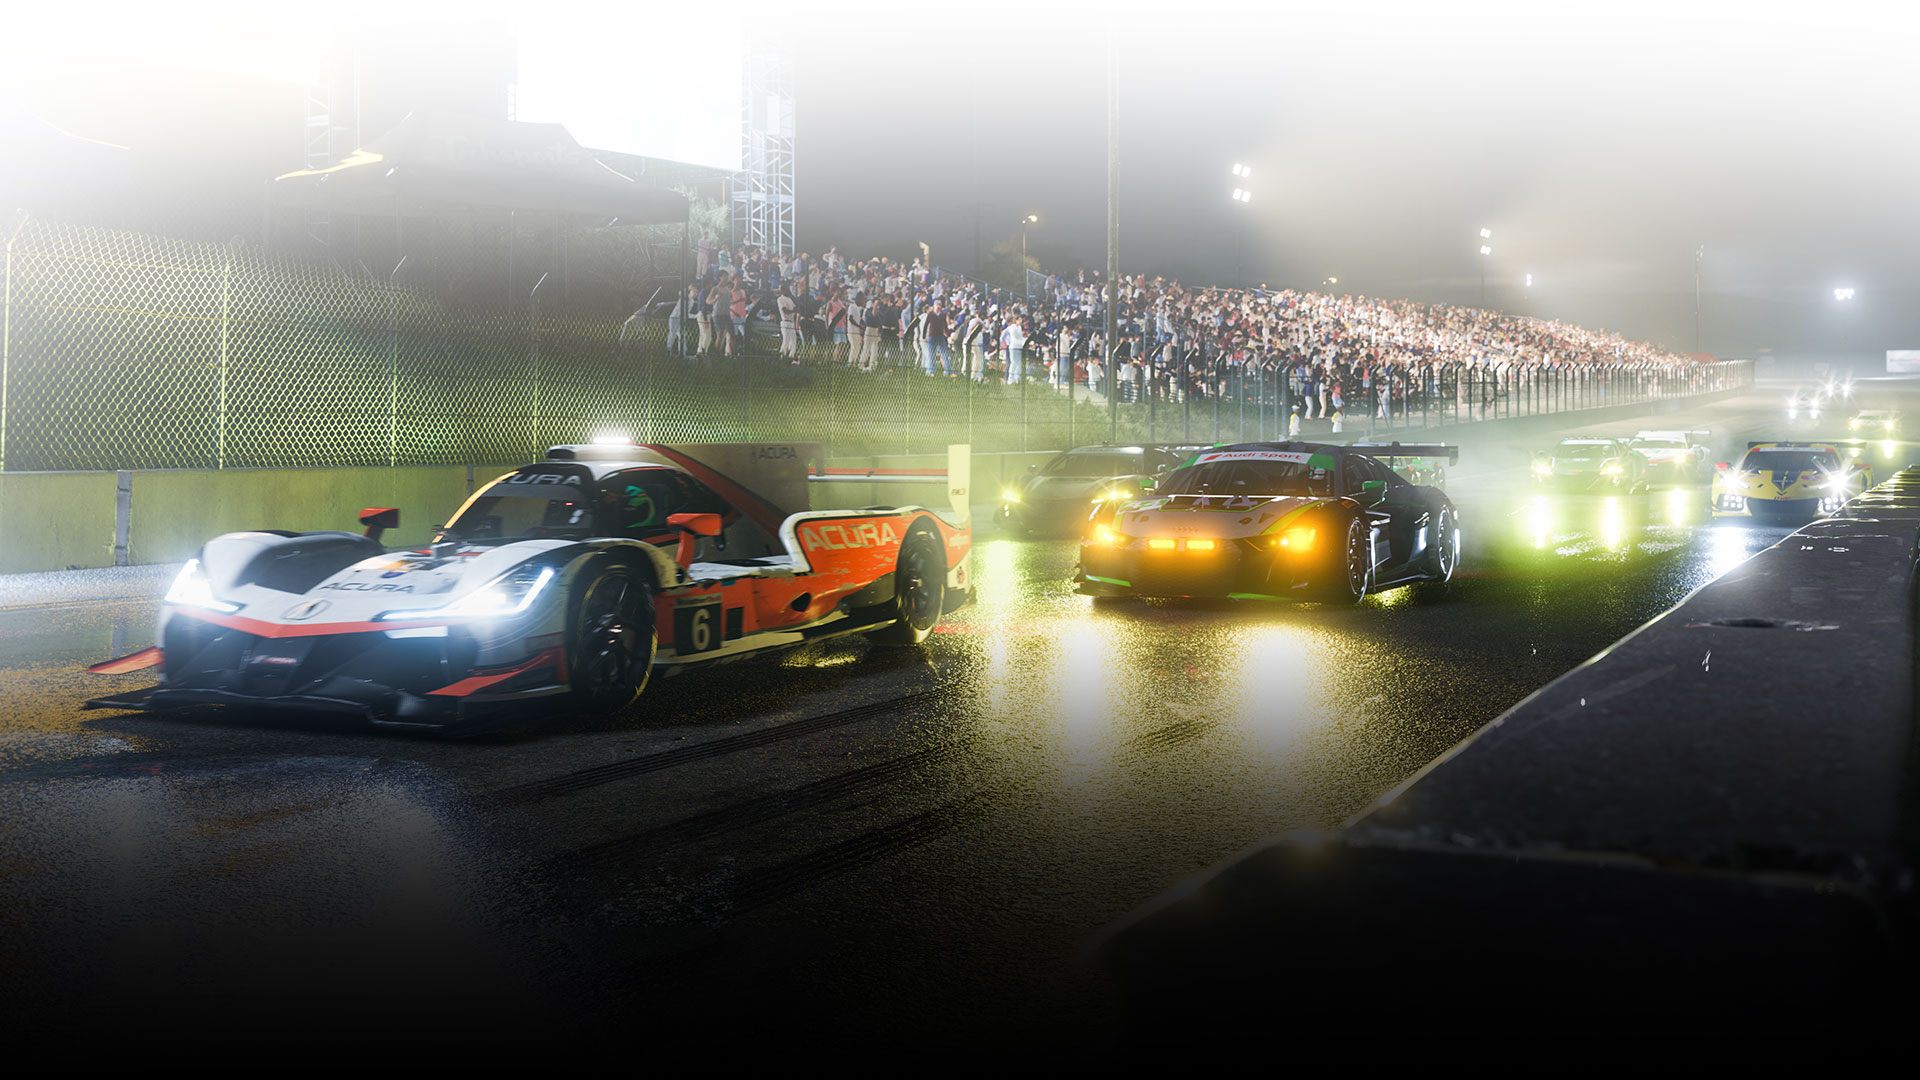 Race cars line up on a wet racetrack at night.